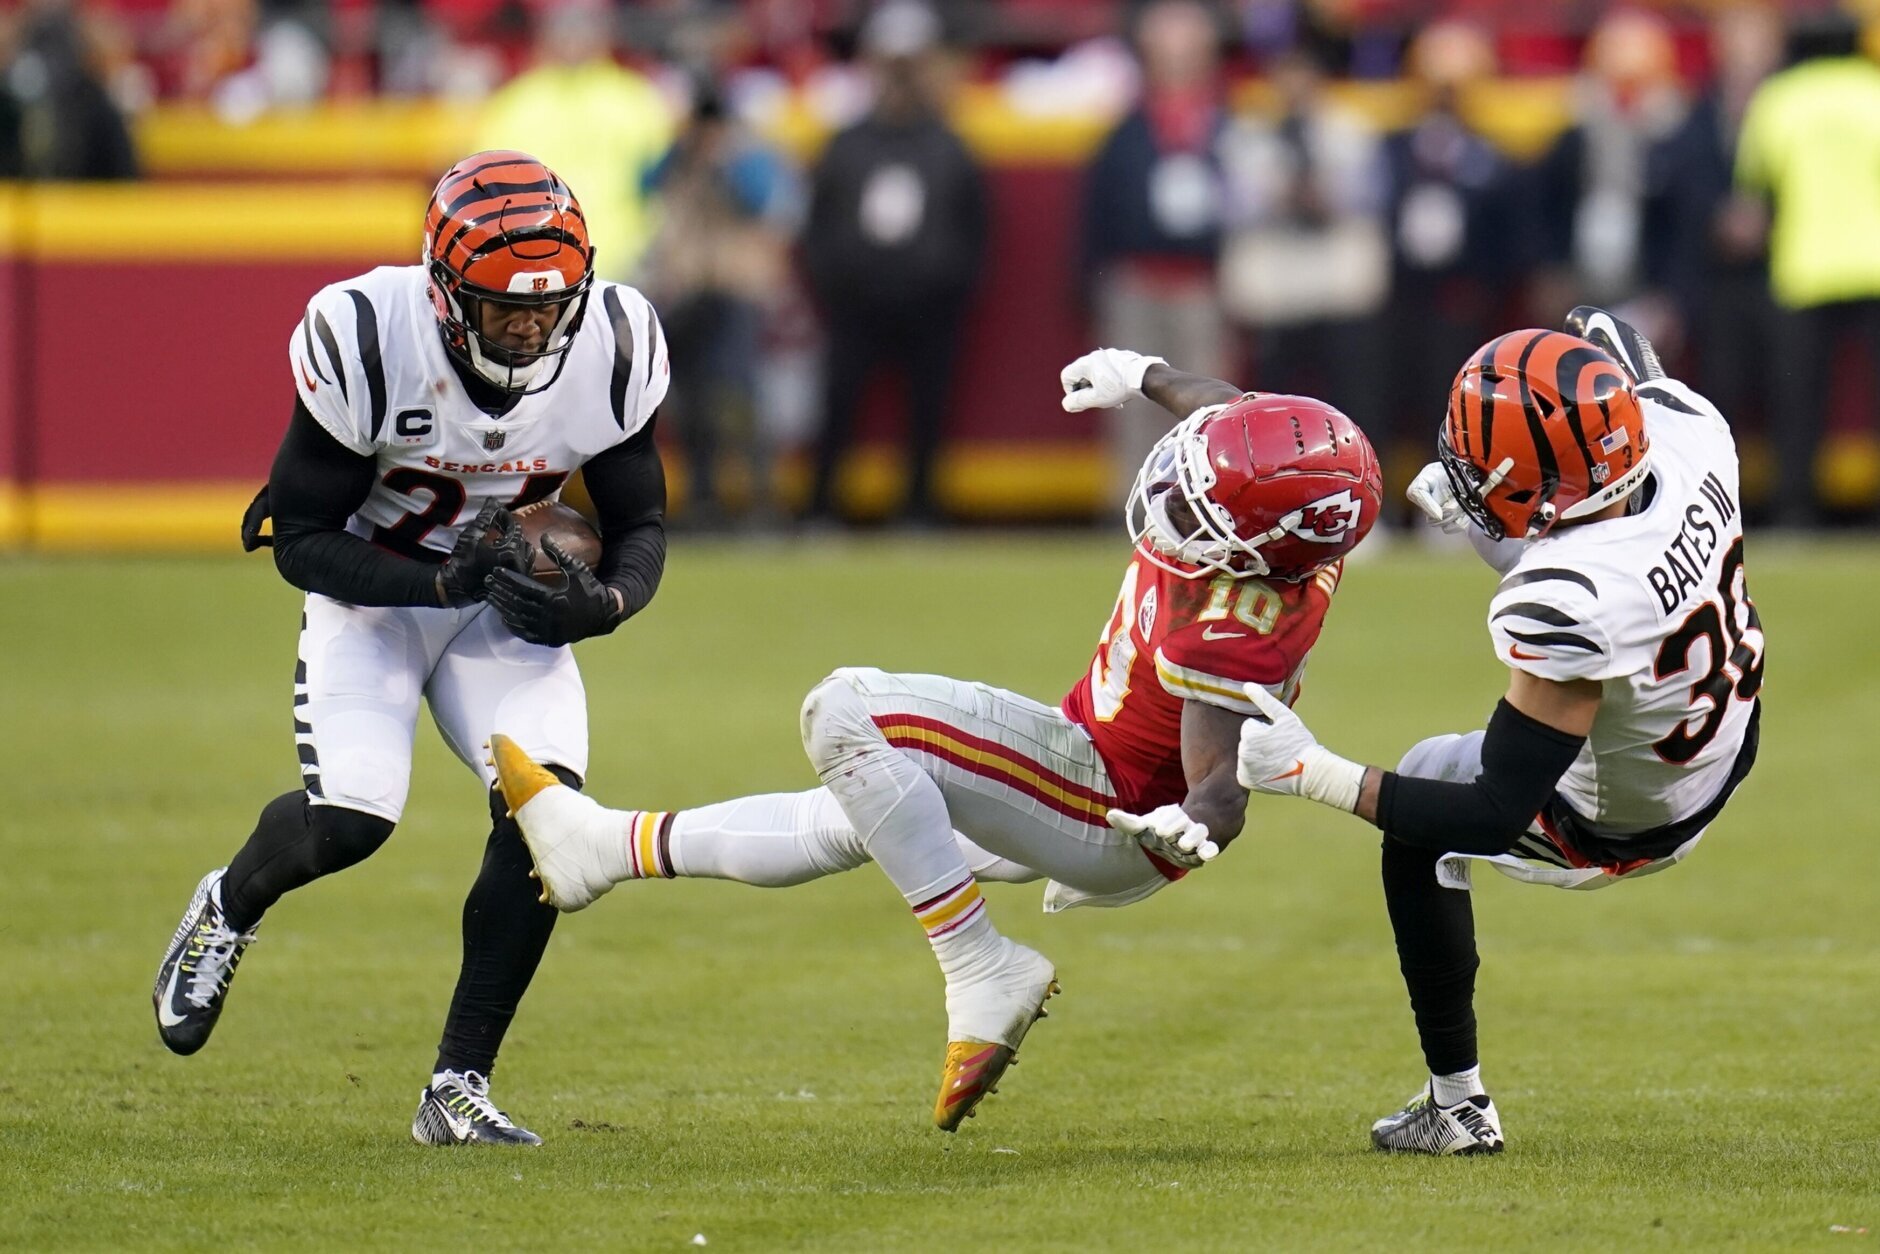 <p><em><strong>Bengals 27</strong></em><br />
<em><strong>Chiefs 24 (OT)</strong></em></p>
<p>On the day <a href="https://wtop.com/entertainment/2022/01/howard-hesseman-known-for-role-in-wkrp-in-cincinnati-dies-at-81/" target="_blank" rel="noopener">Dr. Johnny Fever died</a>, a new Cincinnati legend was born.</p>
<blockquote class="twitter-tweet" data-width="500" data-dnt="true">
<p lang="en" dir="ltr">The moment we should have known. <a href="https://t.co/ULD5uyyMjo">pic.twitter.com/ULD5uyyMjo</a></p>
<p>&mdash; Field Yates (@FieldYates) <a href="https://twitter.com/FieldYates/status/1487930210746085382?ref_src=twsrc%5Etfw">January 30, 2022</a></p></blockquote>
<p><script async src="https://platform.twitter.com/widgets.js" charset="utf-8"></script></p>
<p>Joe Burrow led the Bengals back from an 18-point deficit in KC, matching the second-largest road postseason comeback in NFL history. He&#8217;s also the second QB since 1950 to lead a game-winning drive in back-to-back road playoff games since Colin Kaepernick (remember him?). Burrow and <a href="https://twitter.com/ESPNStatsInfo/status/1487911561704271873?s=20&amp;t=ZwGM27_DxHf3YQ-SXbiy6w" target="_blank" rel="noopener">his rookie friends are legit</a> — so this result should not have come as a surprise.</p>
<p>Here&#8217;s another reason why it shouldn&#8217;t surprise you — including this Kansas City loss, playoff teams that survived an overtime game have gone 8-18 the following game. <a href="https://profootballtalk.nbcsports.com/2022/01/30/andy-reid-i-couldve-called-a-better-play-at-end-of-first-half/" target="_blank" rel="noopener">The Chiefs had their chances</a> but this was about the Bengals, who came in and seized their first Super Bowl trip in 33 years. We&#8217;ll see if the above statistic comes into play in L.A. in two weeks but regardless, <a href="https://nypost.com/2022/01/24/bengals-eli-apple-tears-into-giants-saints-on-twitter/" target="_blank" rel="noopener">Eli Apple at Media Day promises to be fun</a>.</p>
